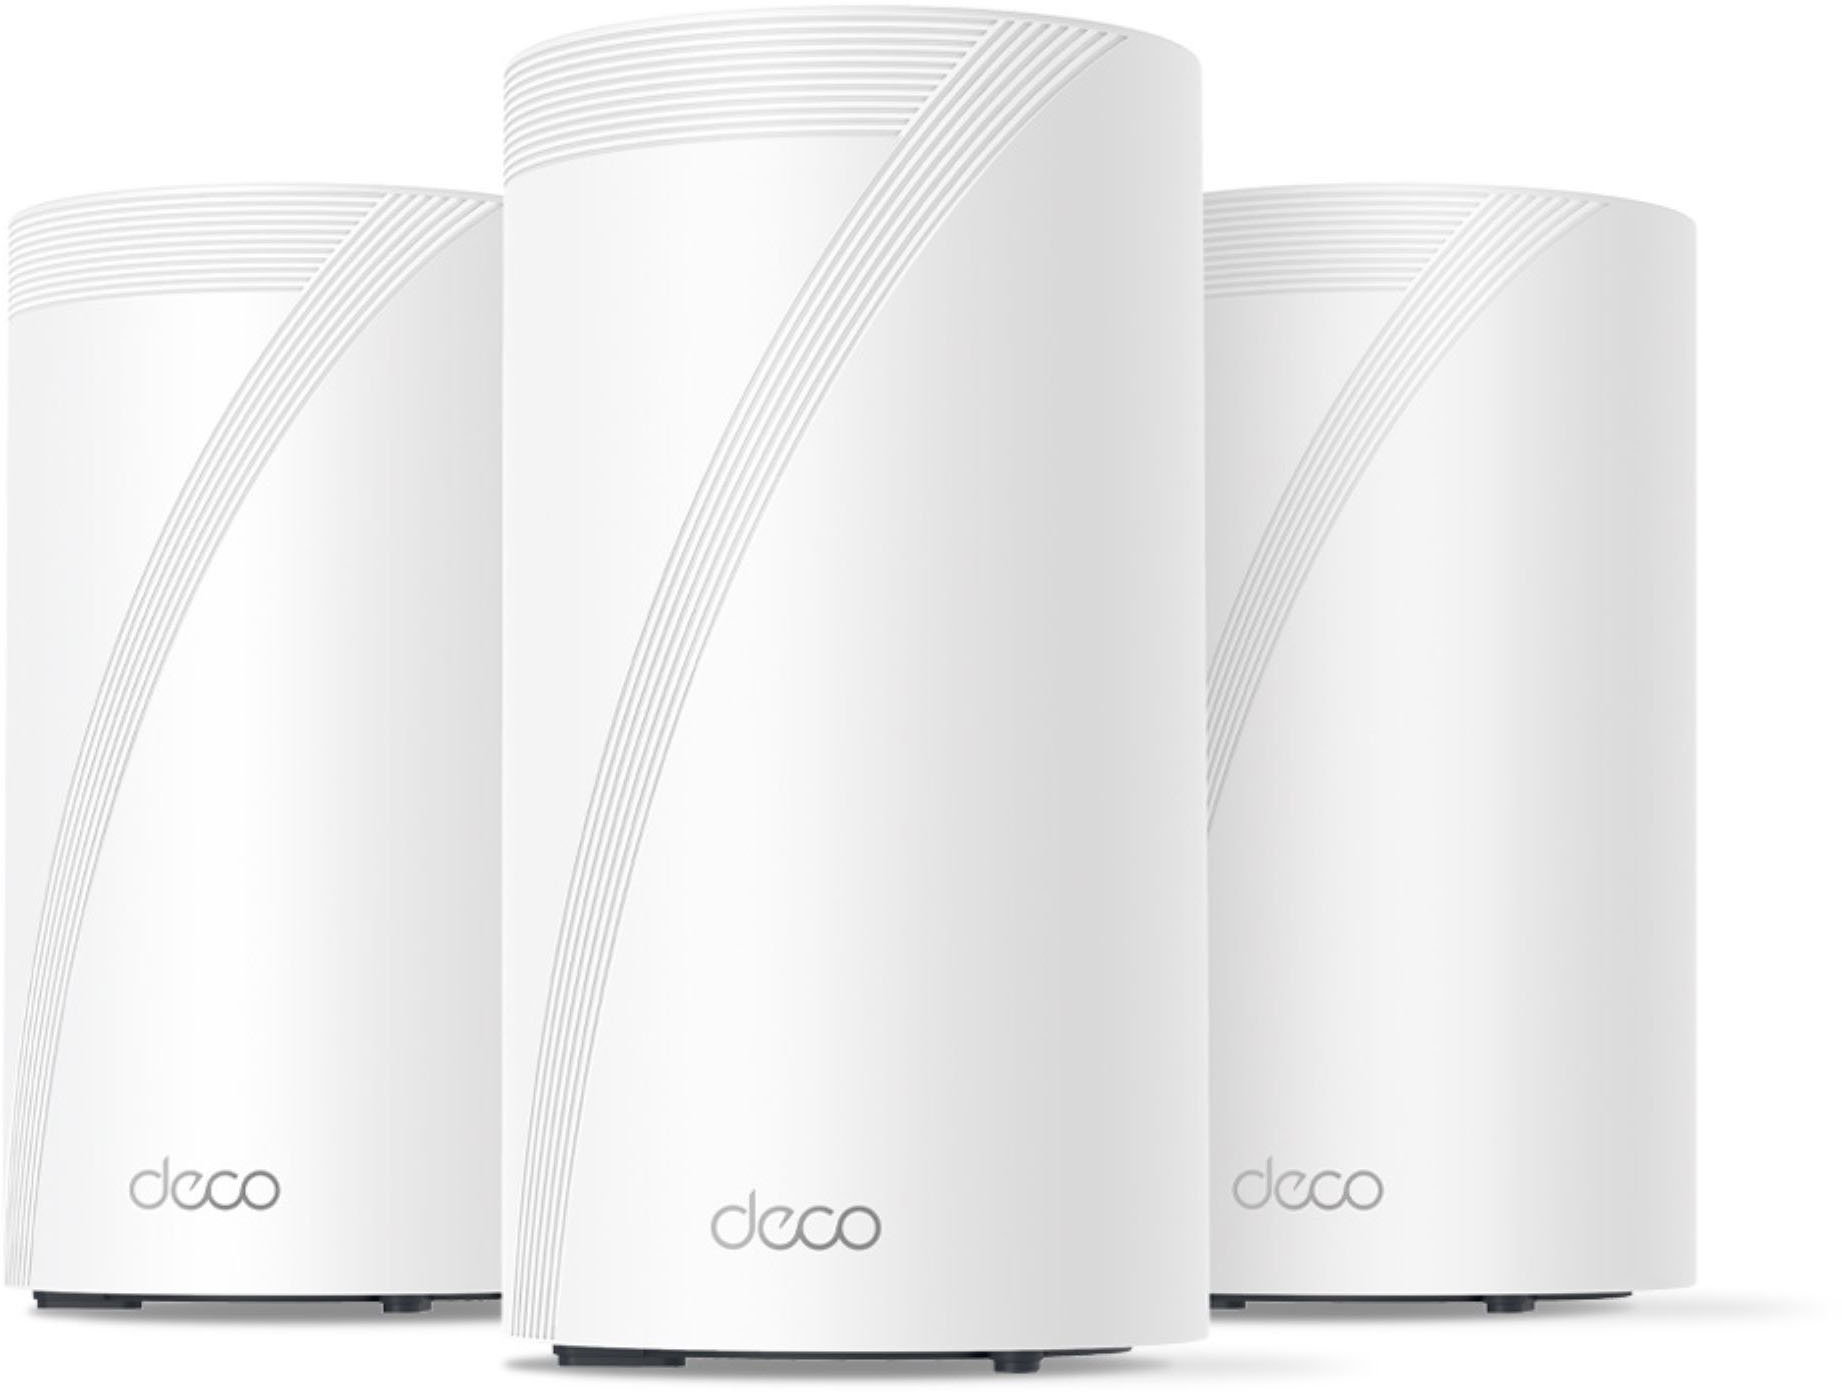 TP-Link Deco X50 Review: Solid and great value